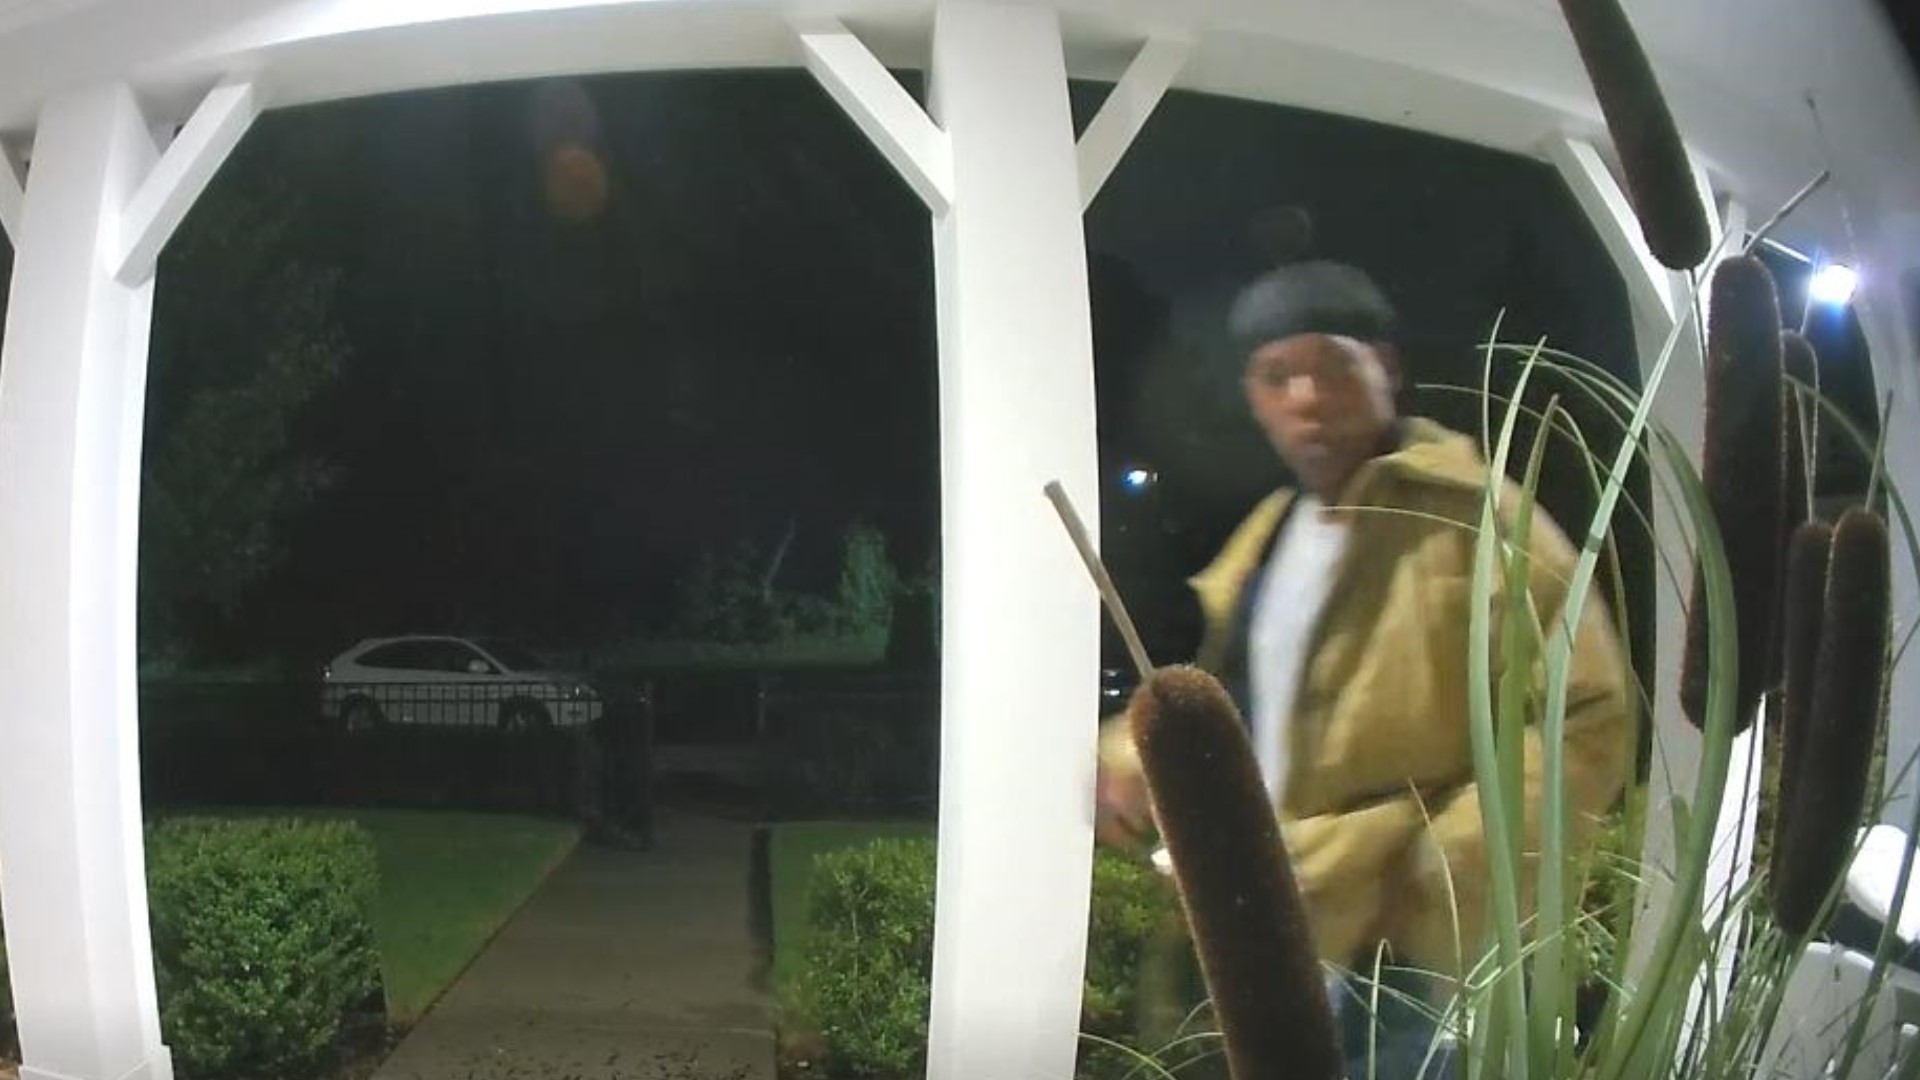 Atlanta Police say a suspected prowler came to a home near Westside Park in August.